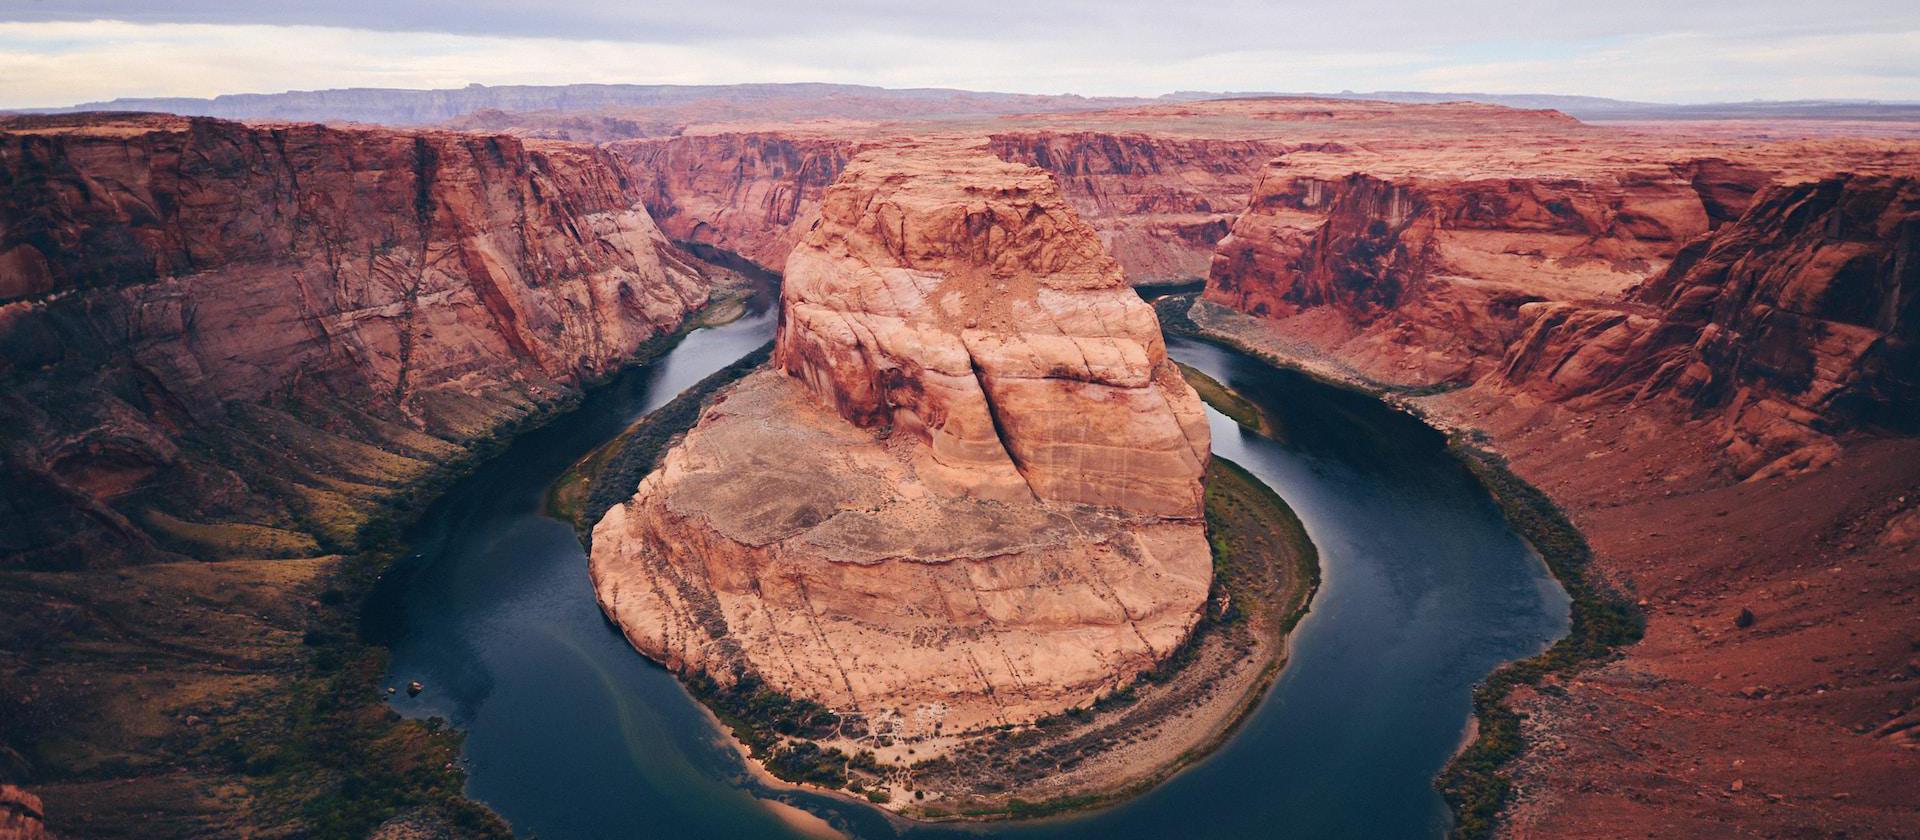 Image of horse shoe shaped river bending around a red rock.